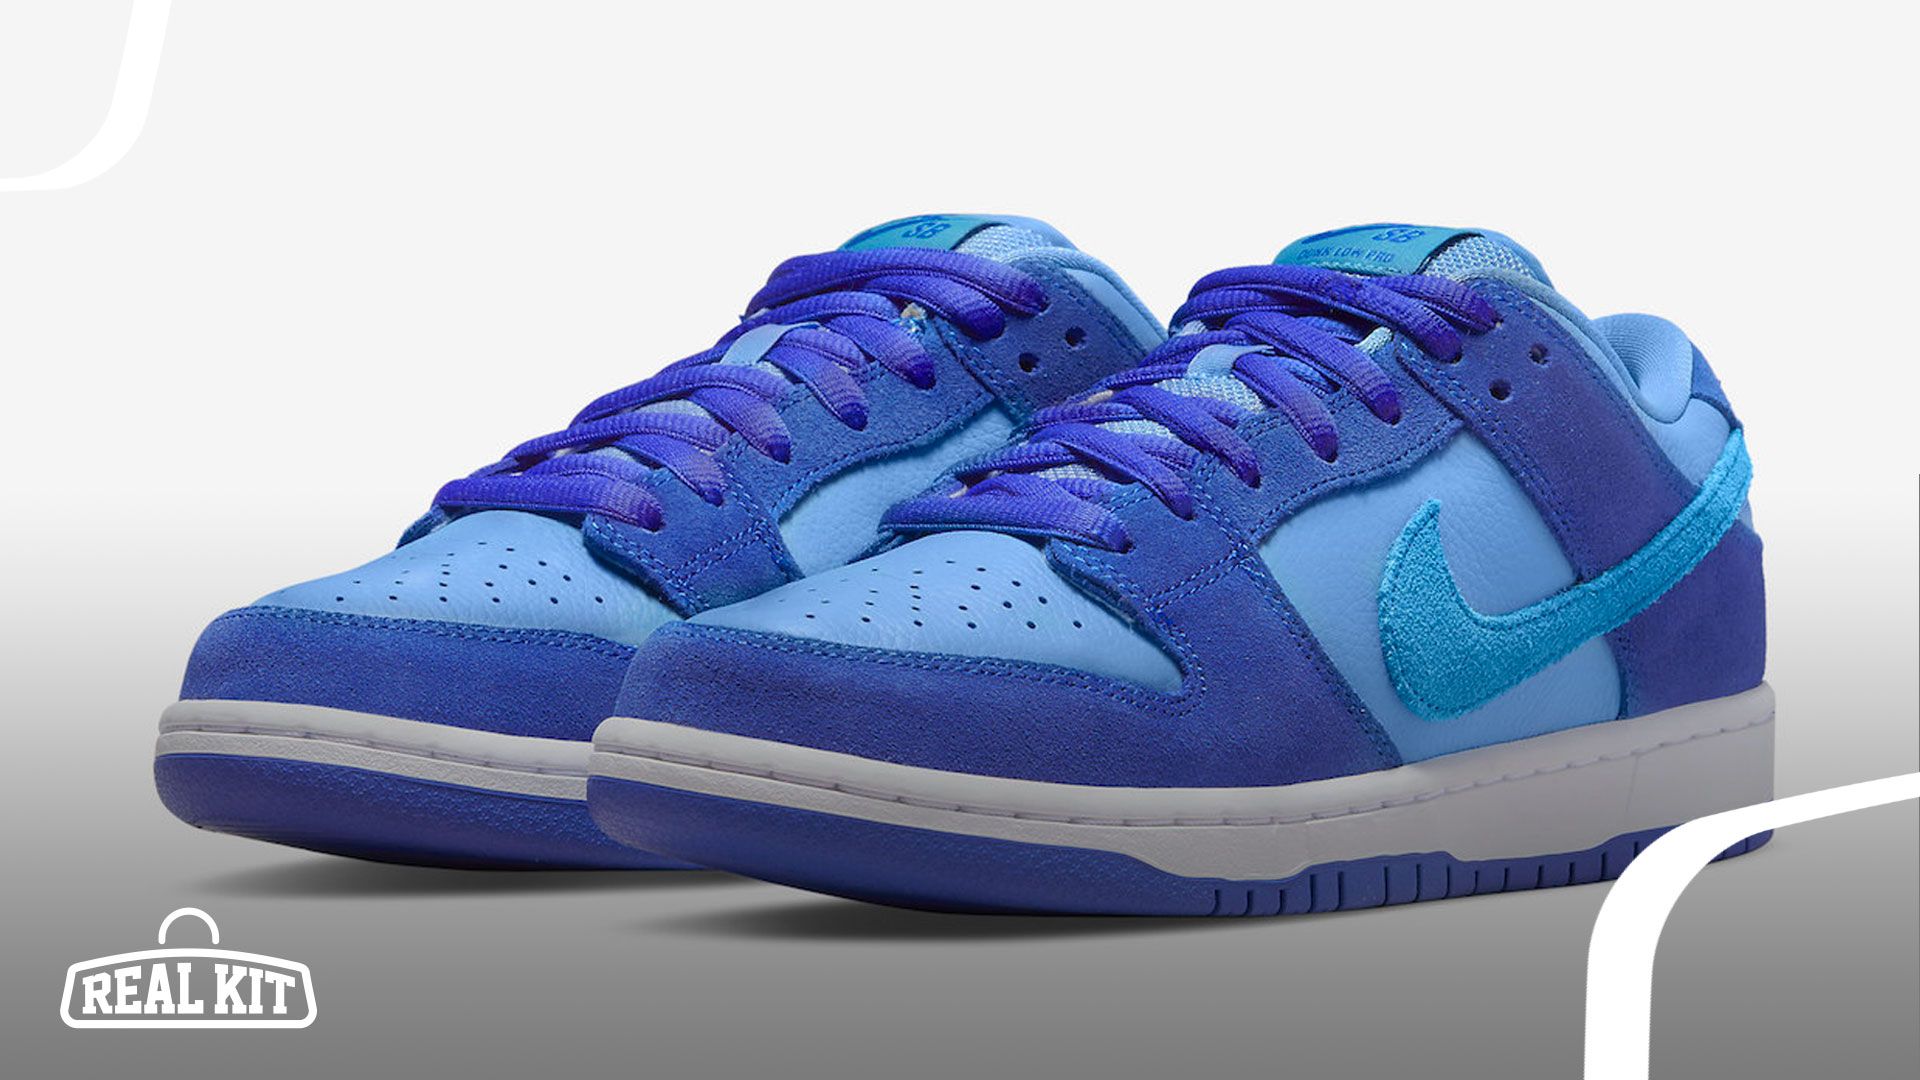 When Is The Nike SB Dunk Low Blue Raspberry Release Date? Here's